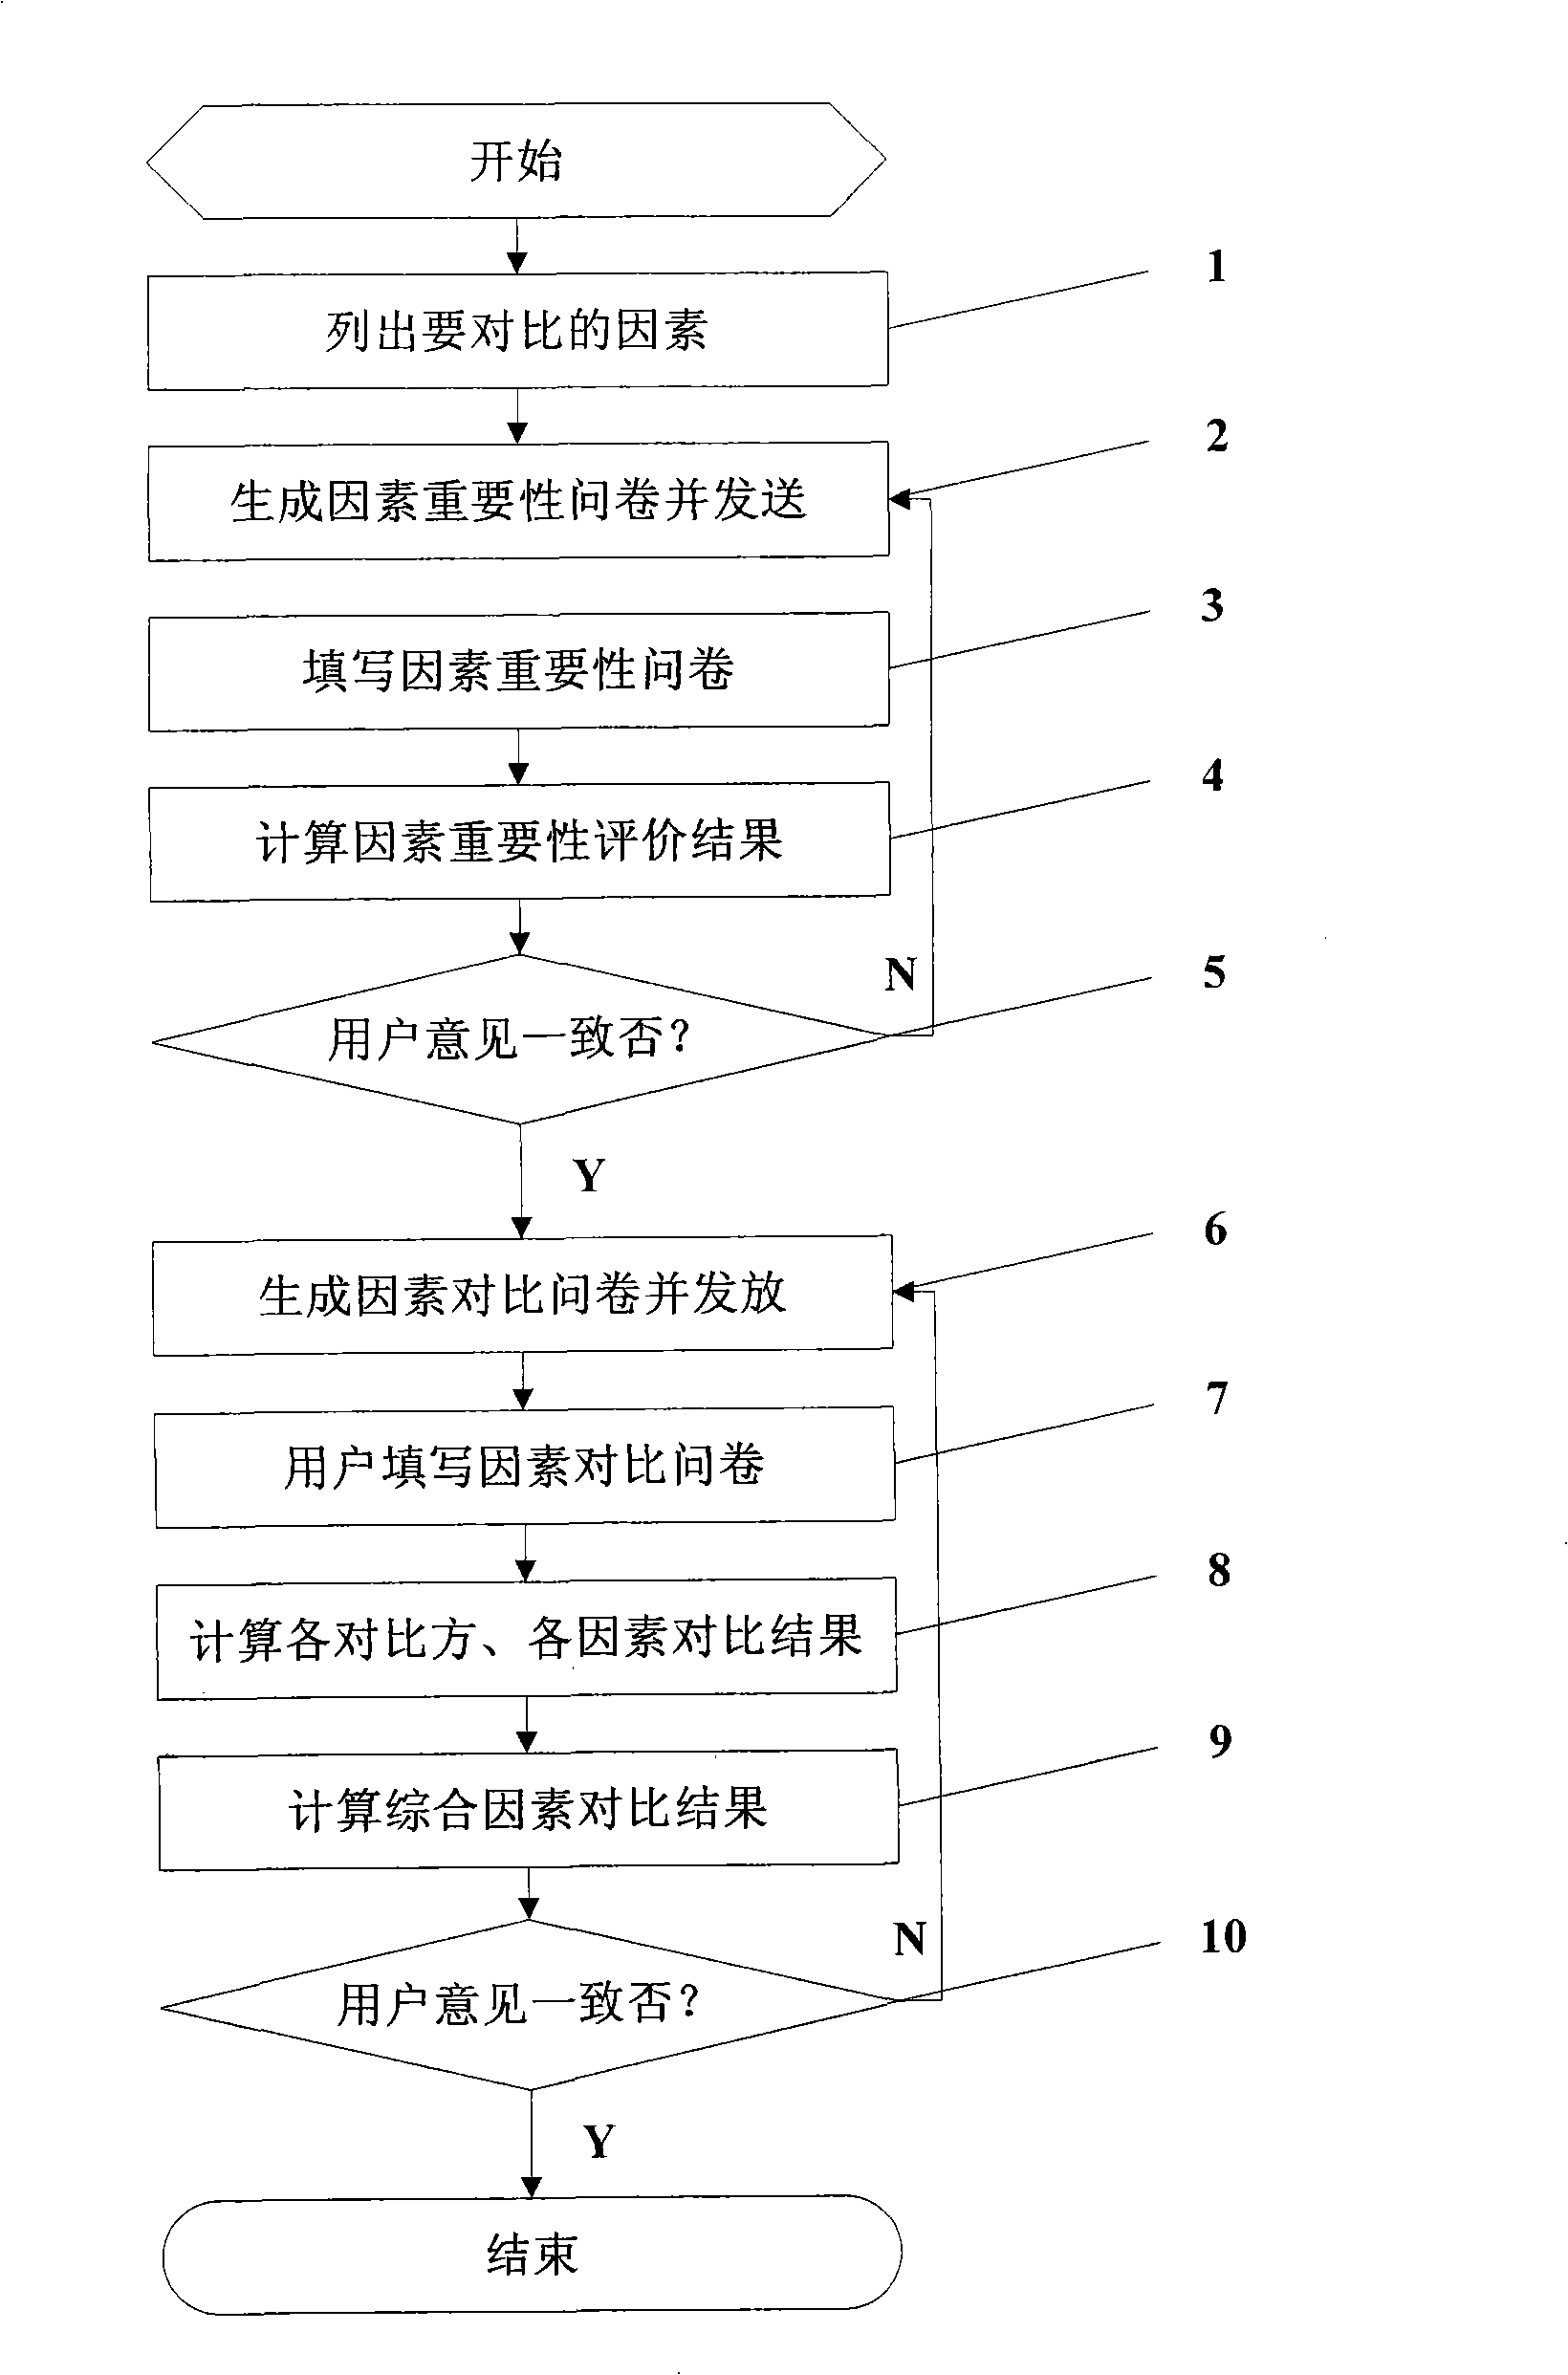 Method and system for implementing synthesis diathesis contrast based on electric questionnaire